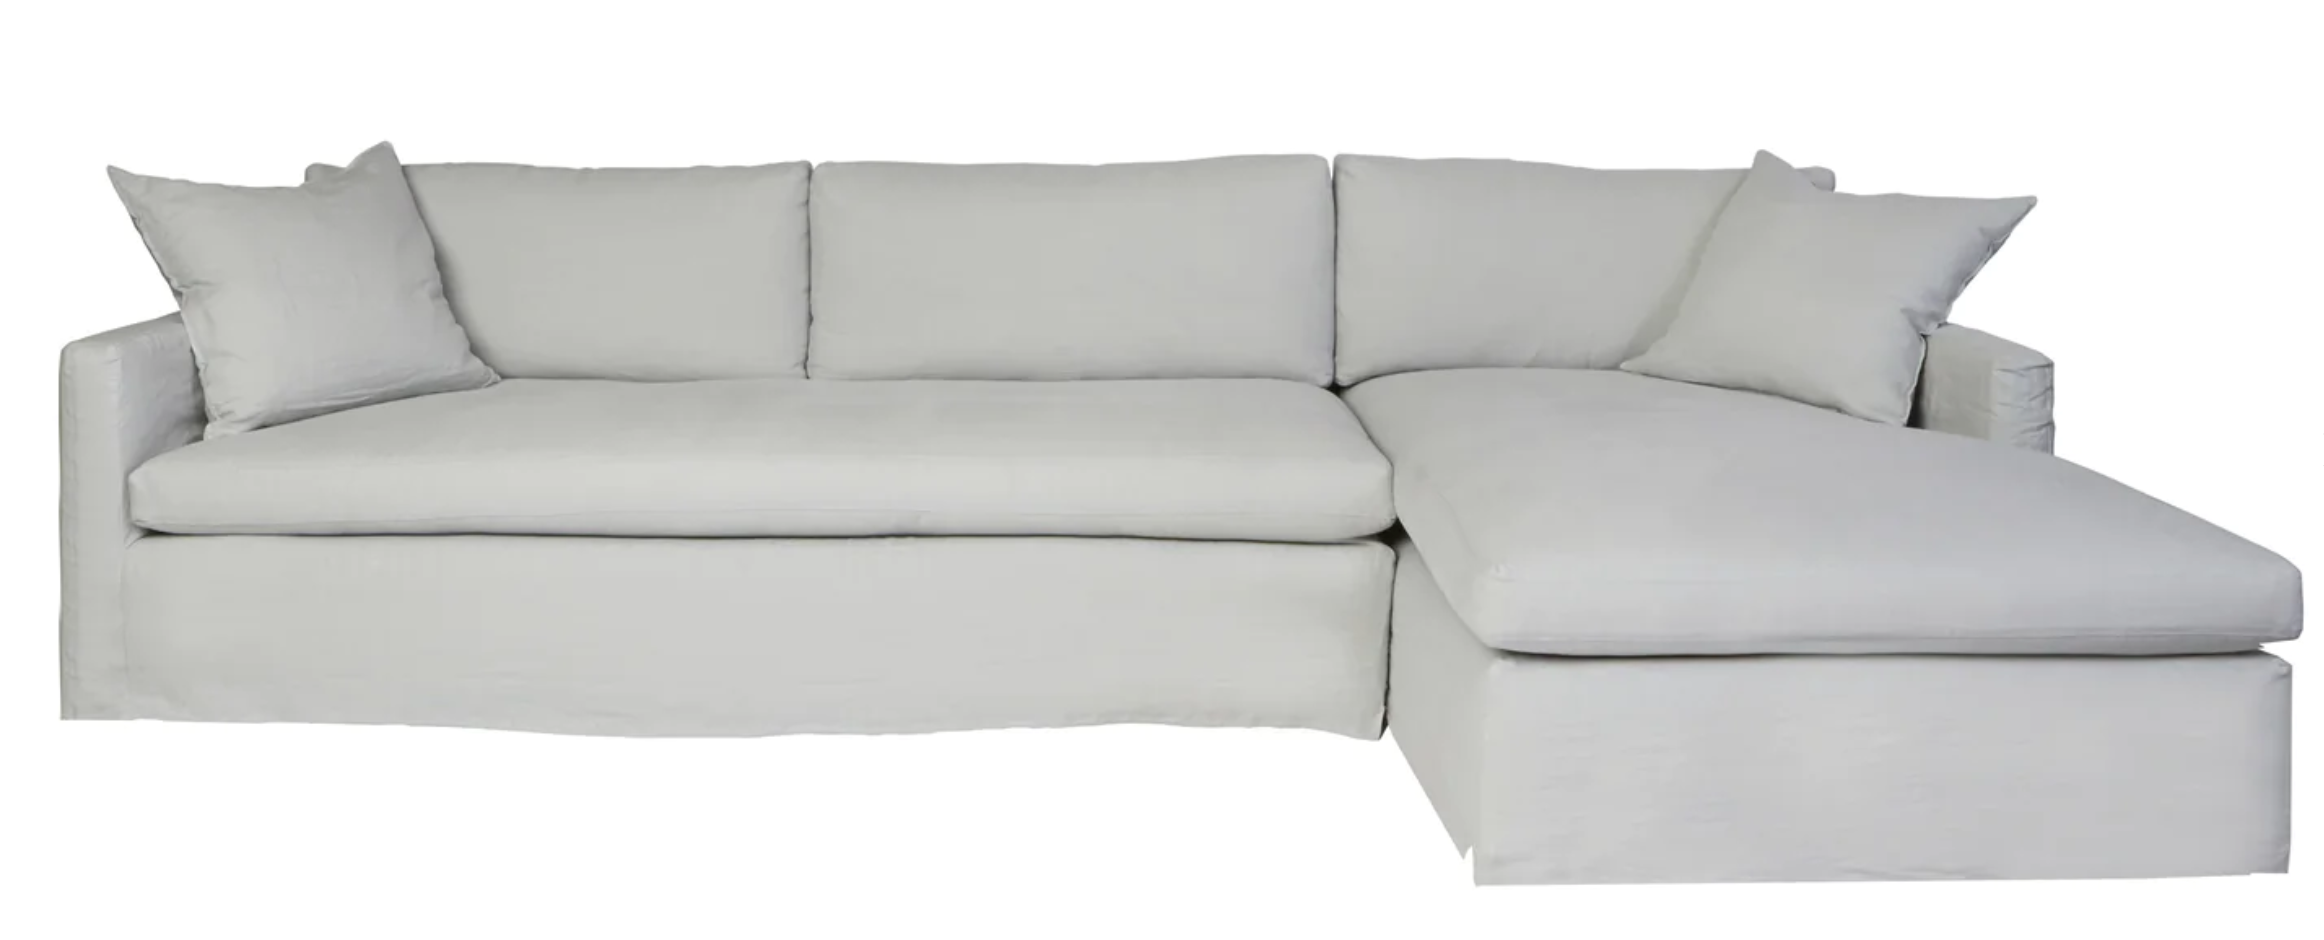 "Essentials" Louis 2pc Sectional, Tier 1 Fabric